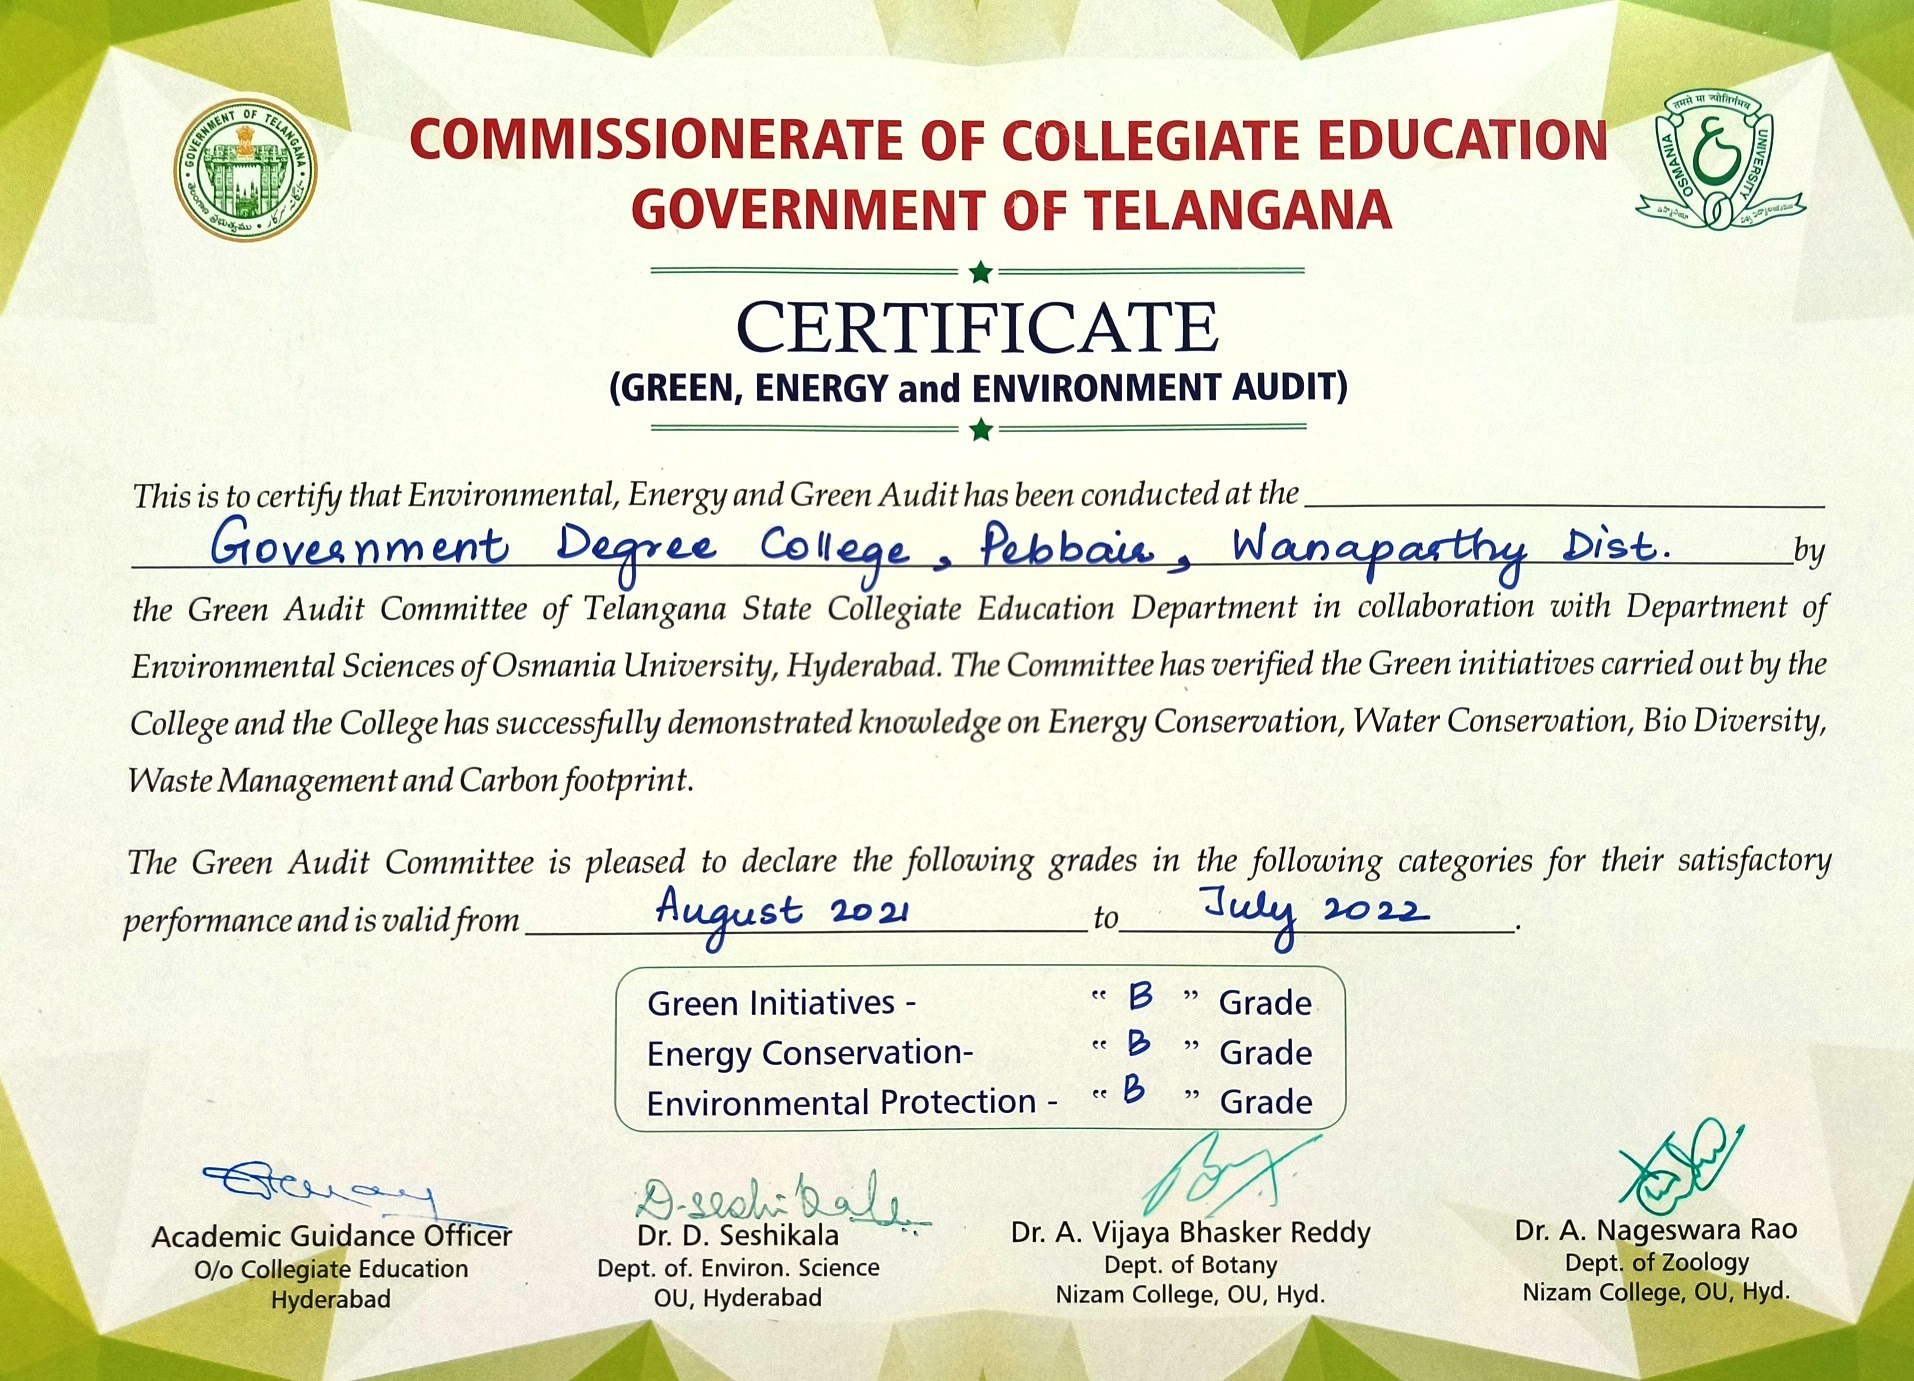 Green Audit Certificate For 2021-22